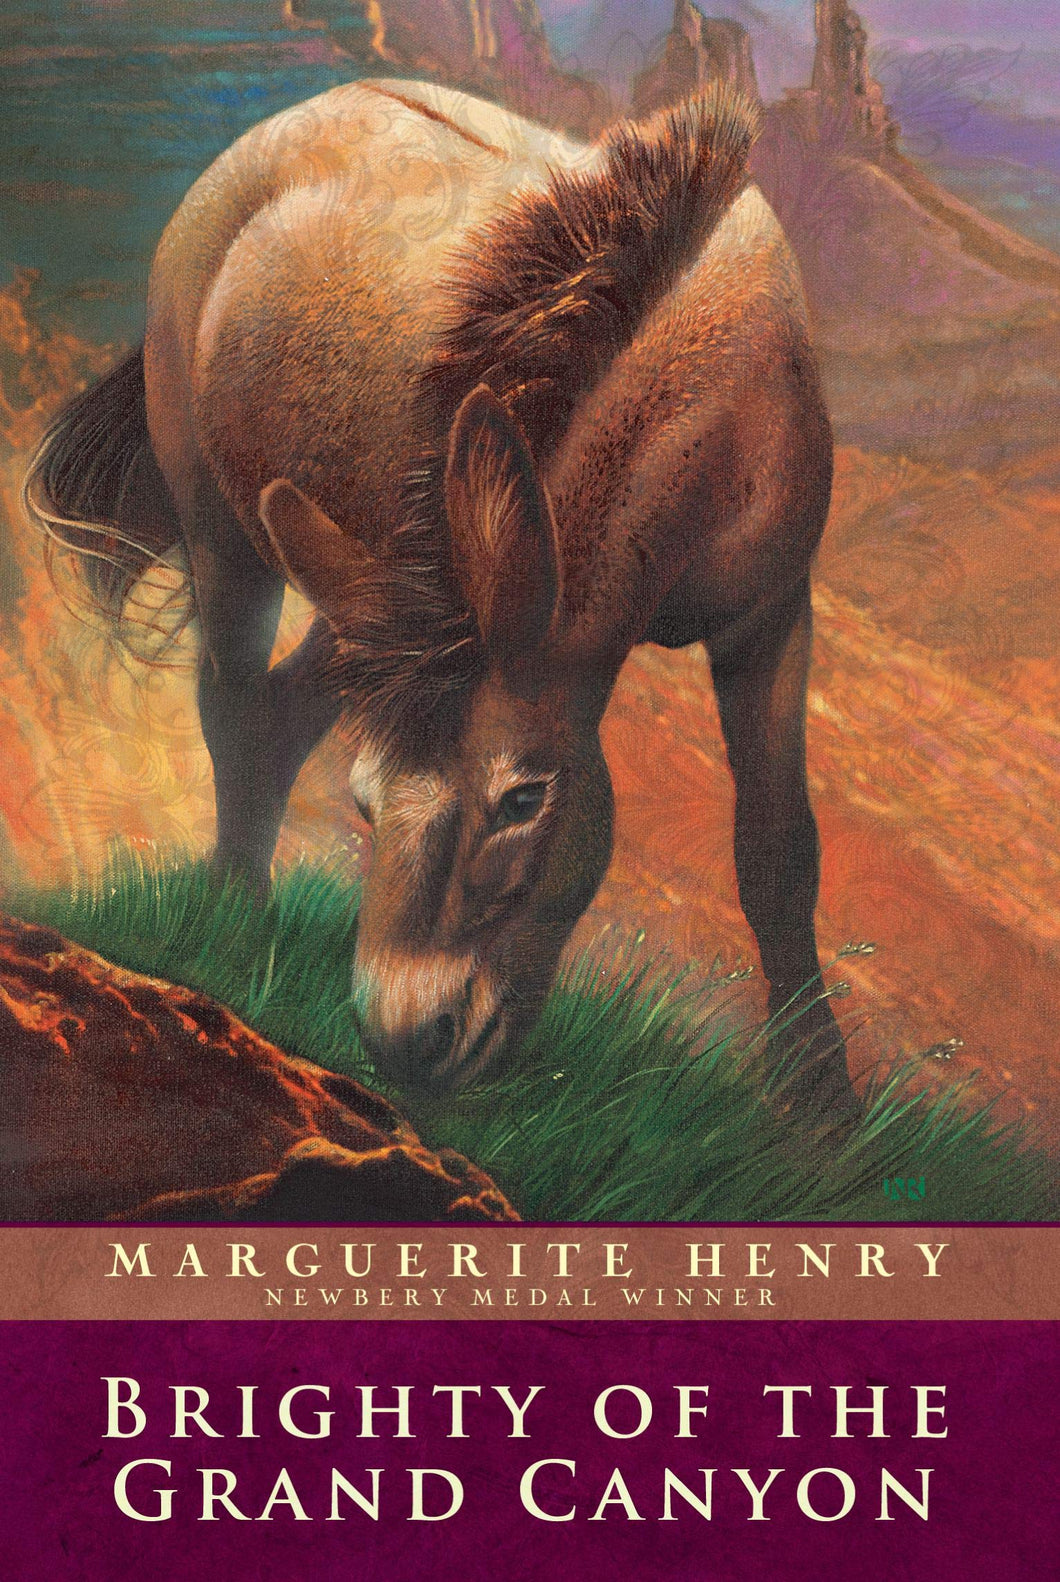 Brighty of the Grand Canyon by Marguarite Henry